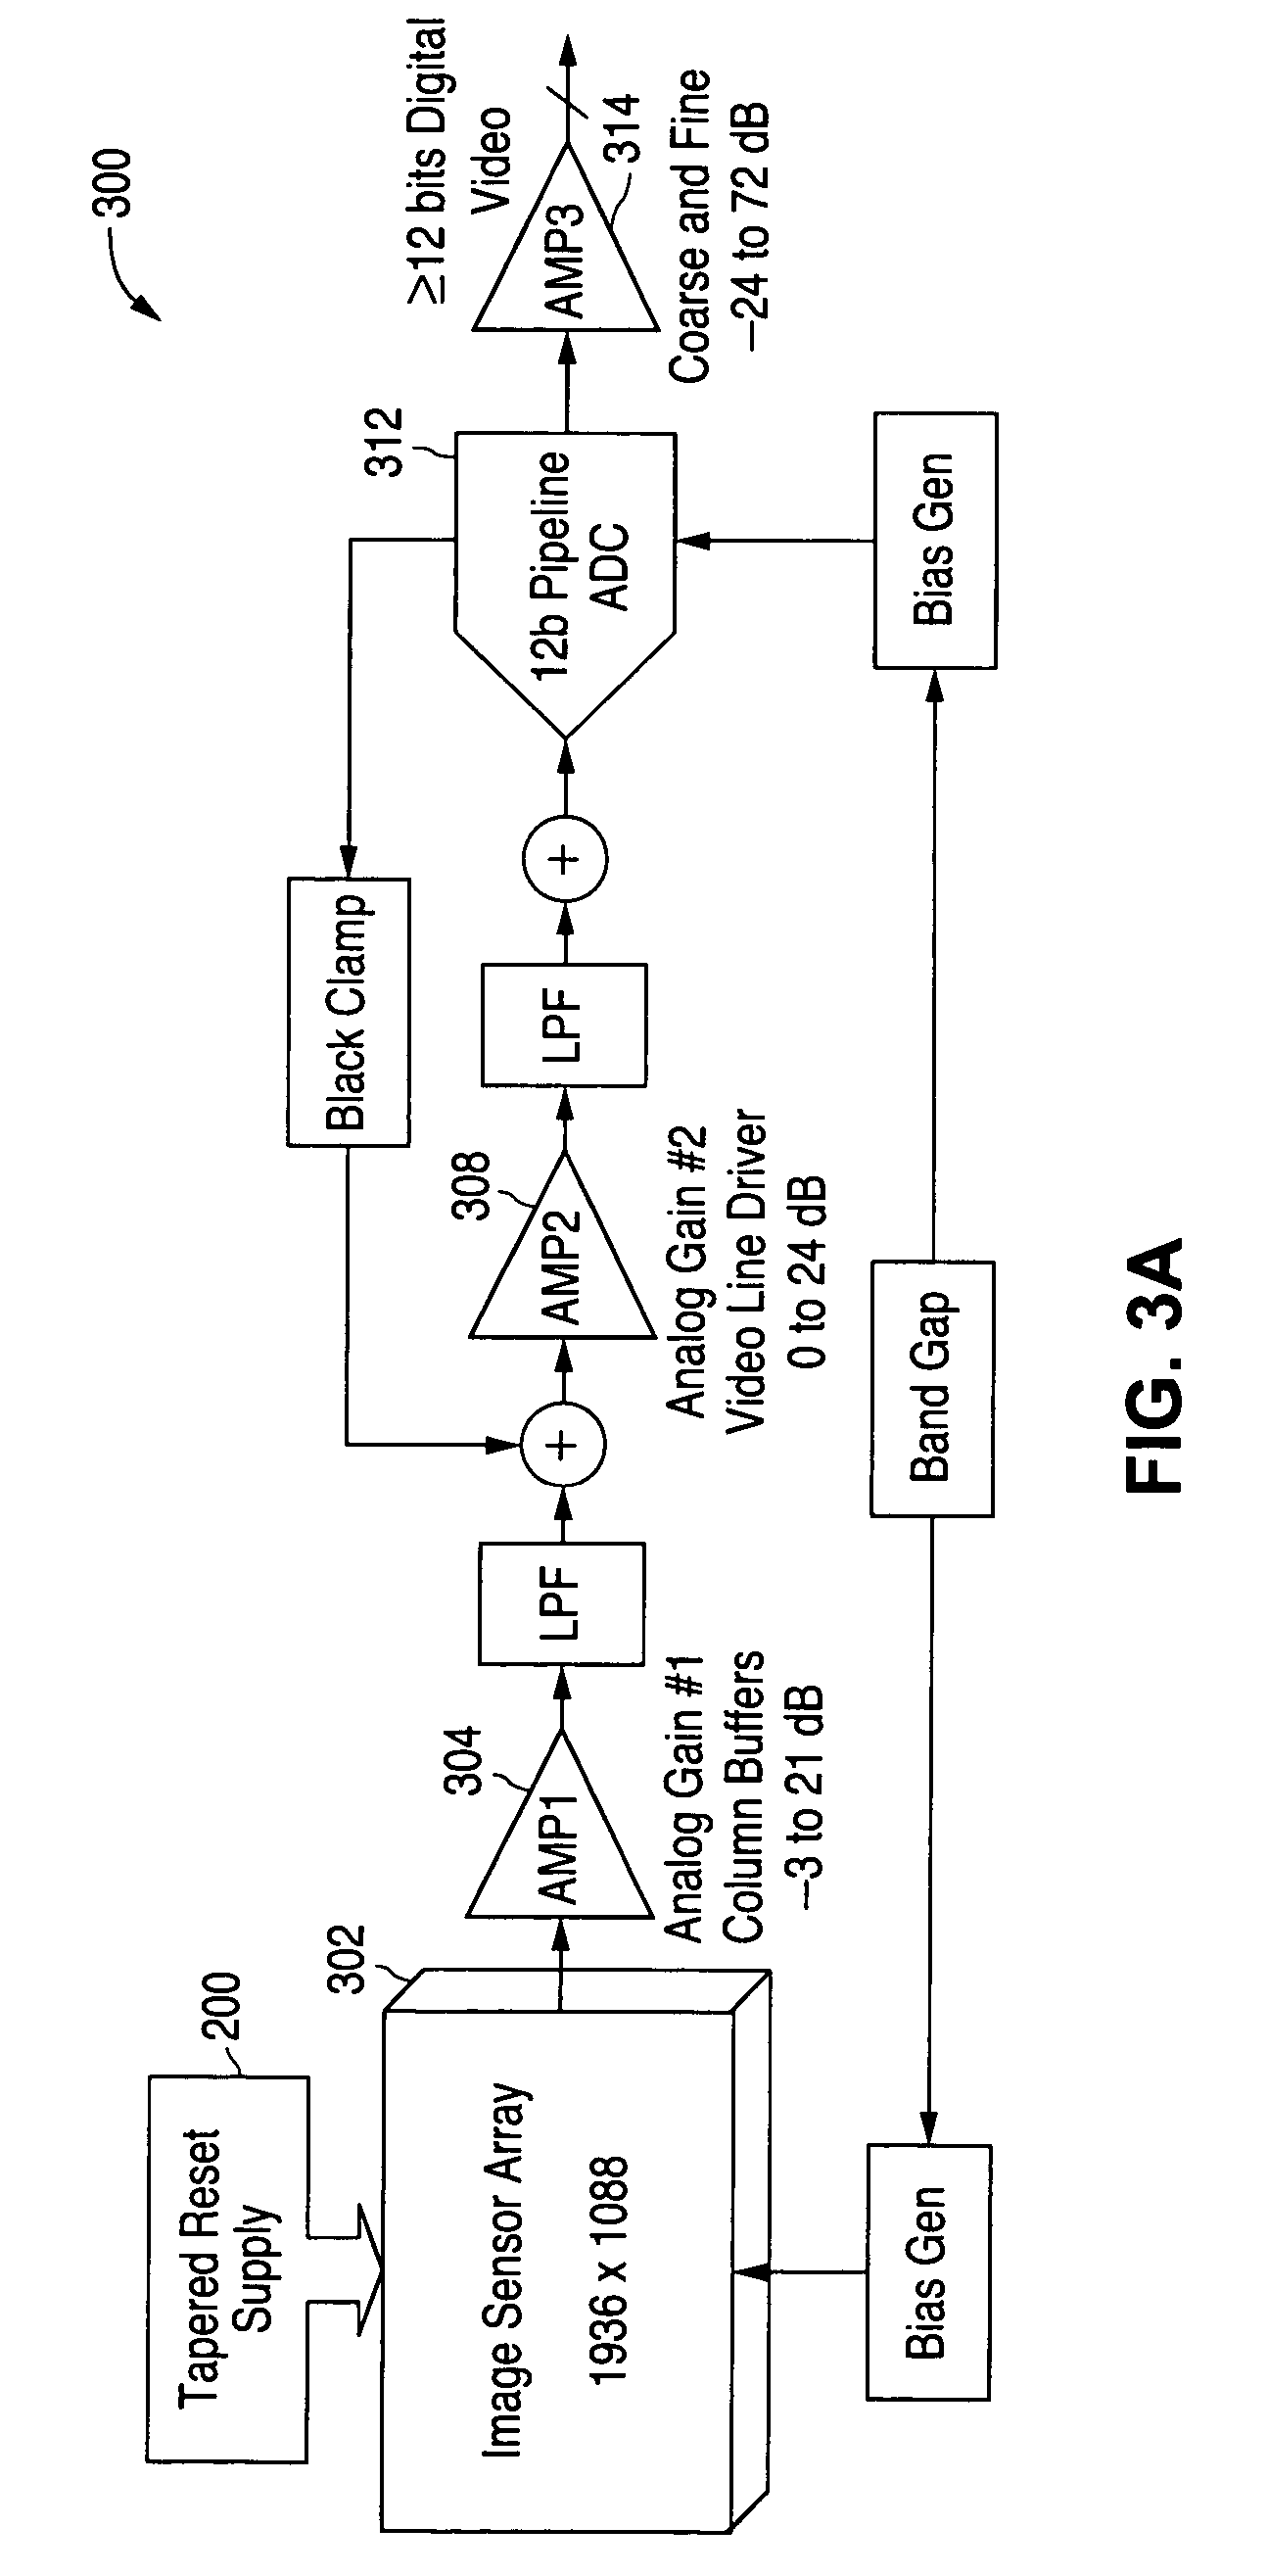 CMOS imaging system with low fixed pattern noise